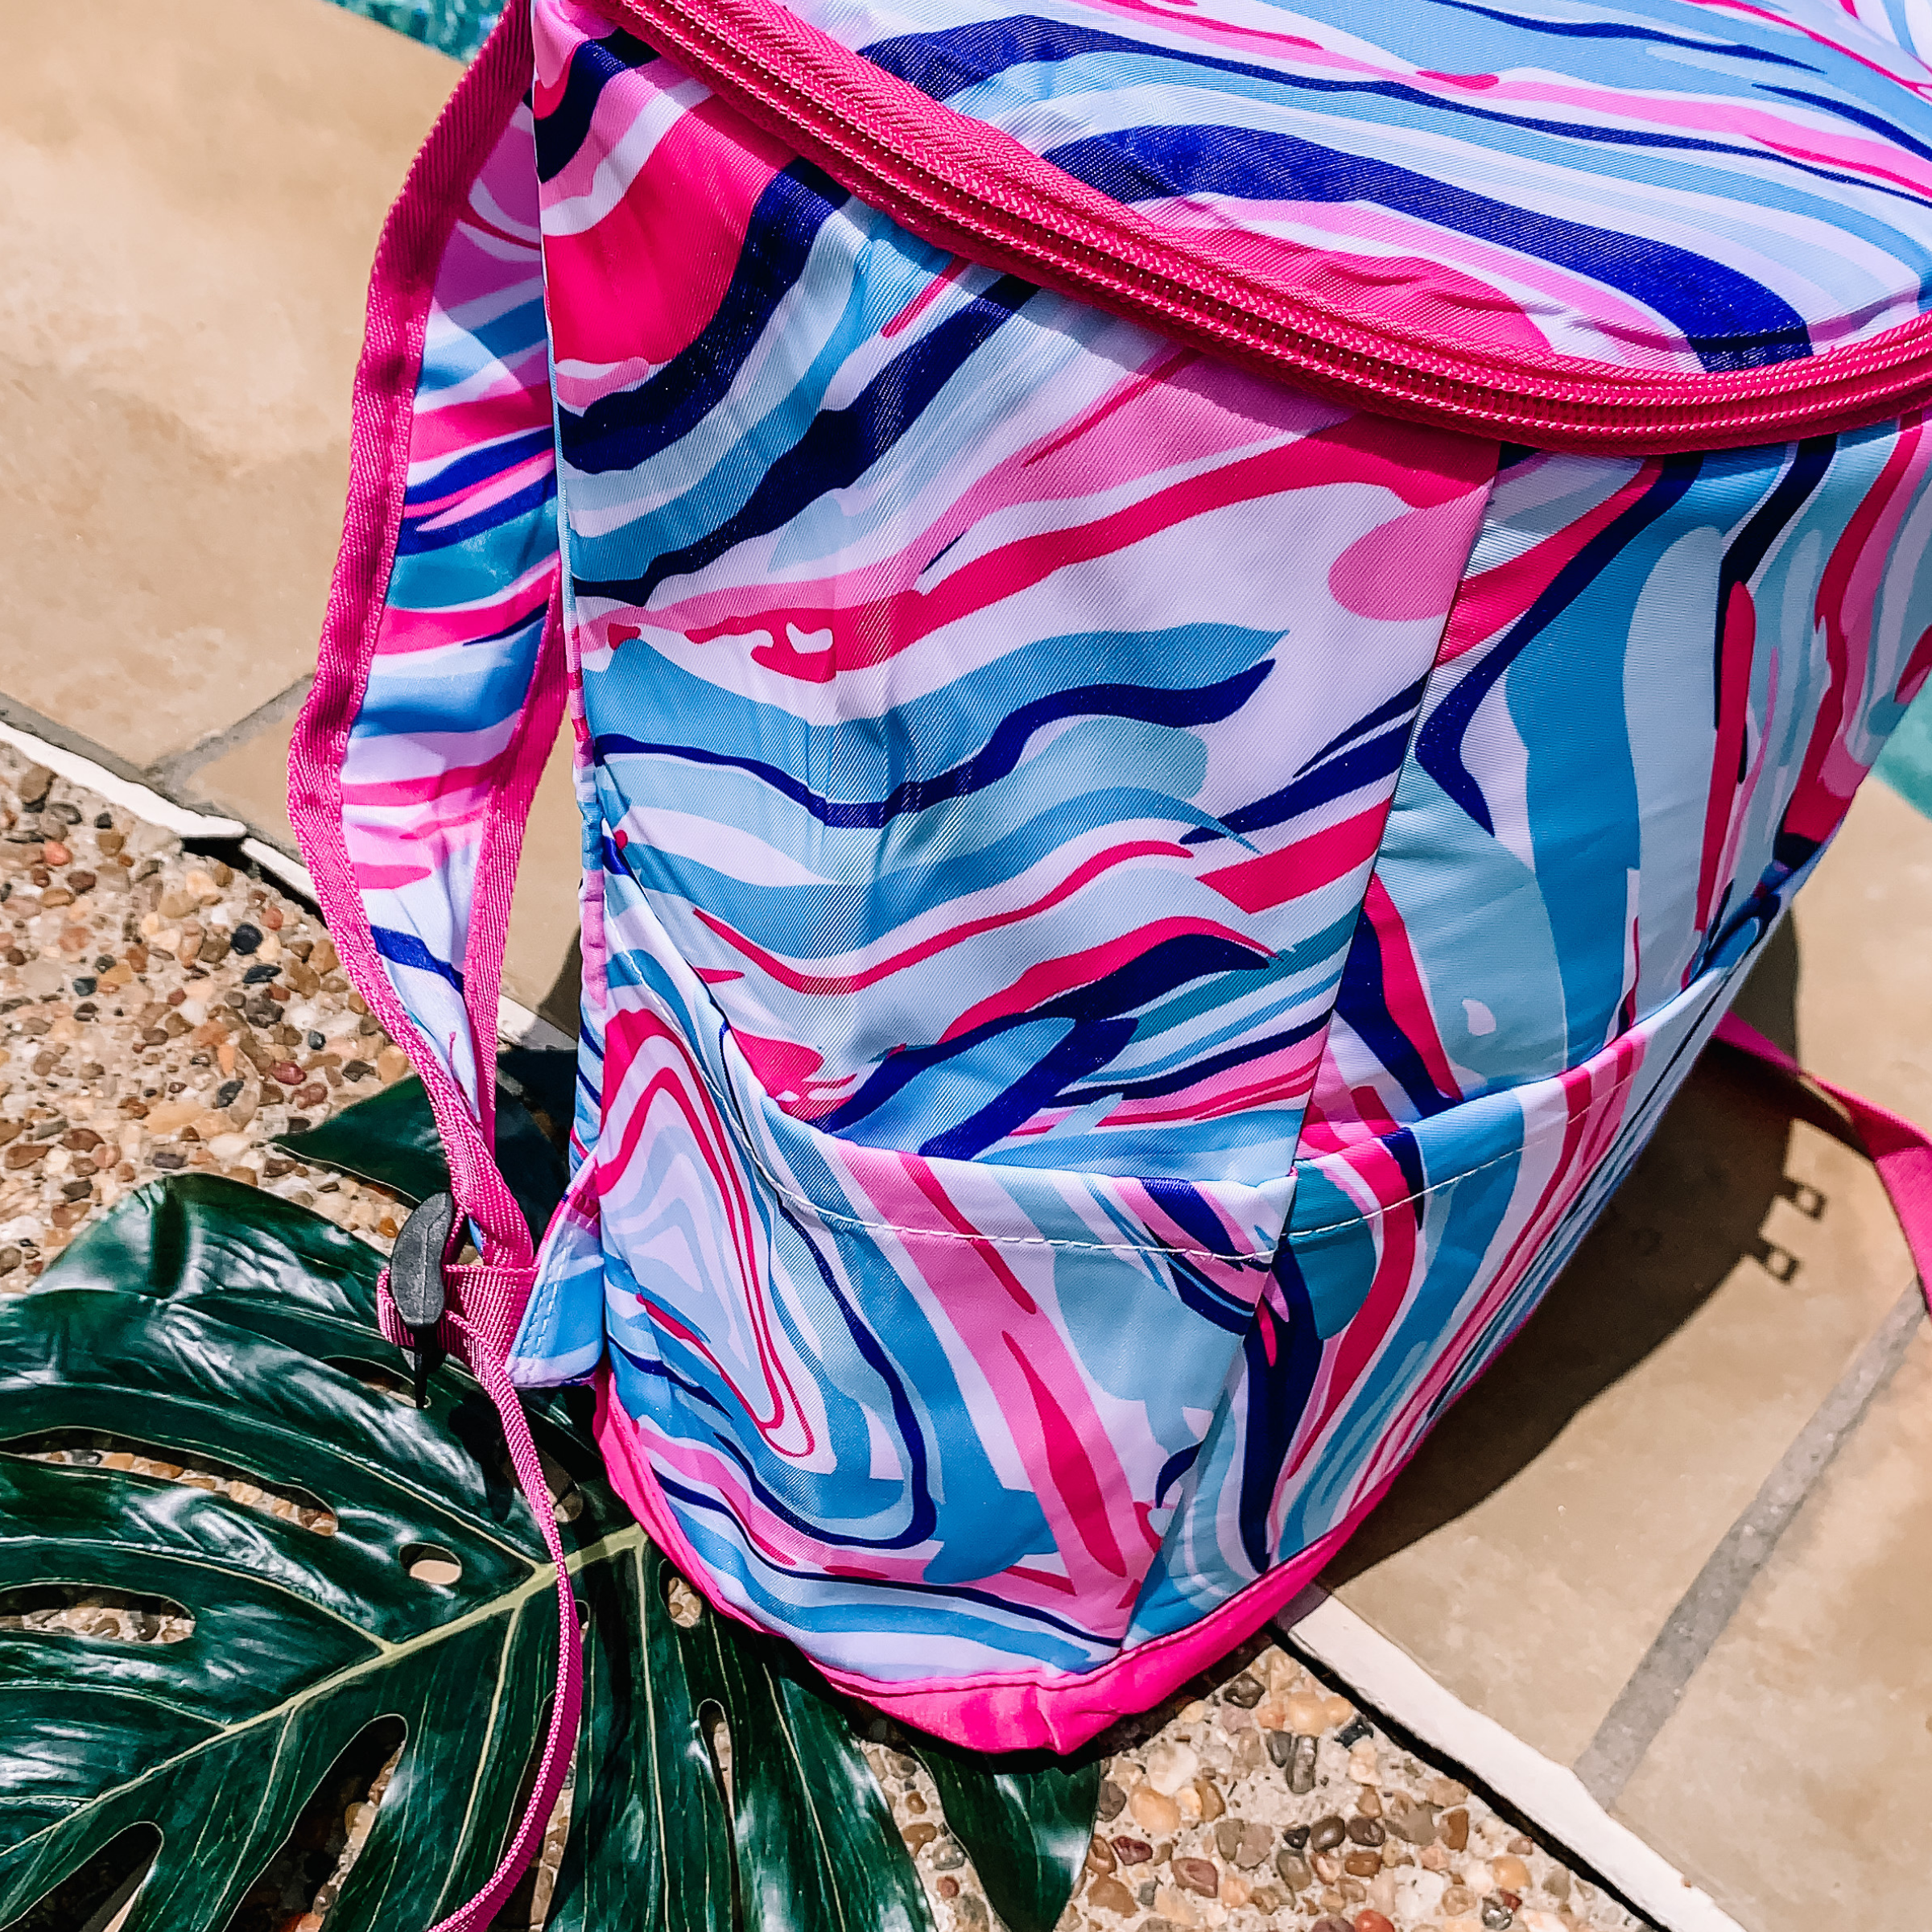 Here To Party Backpack Cooler in Multi Swirl - Giddy Up Glamour Boutique